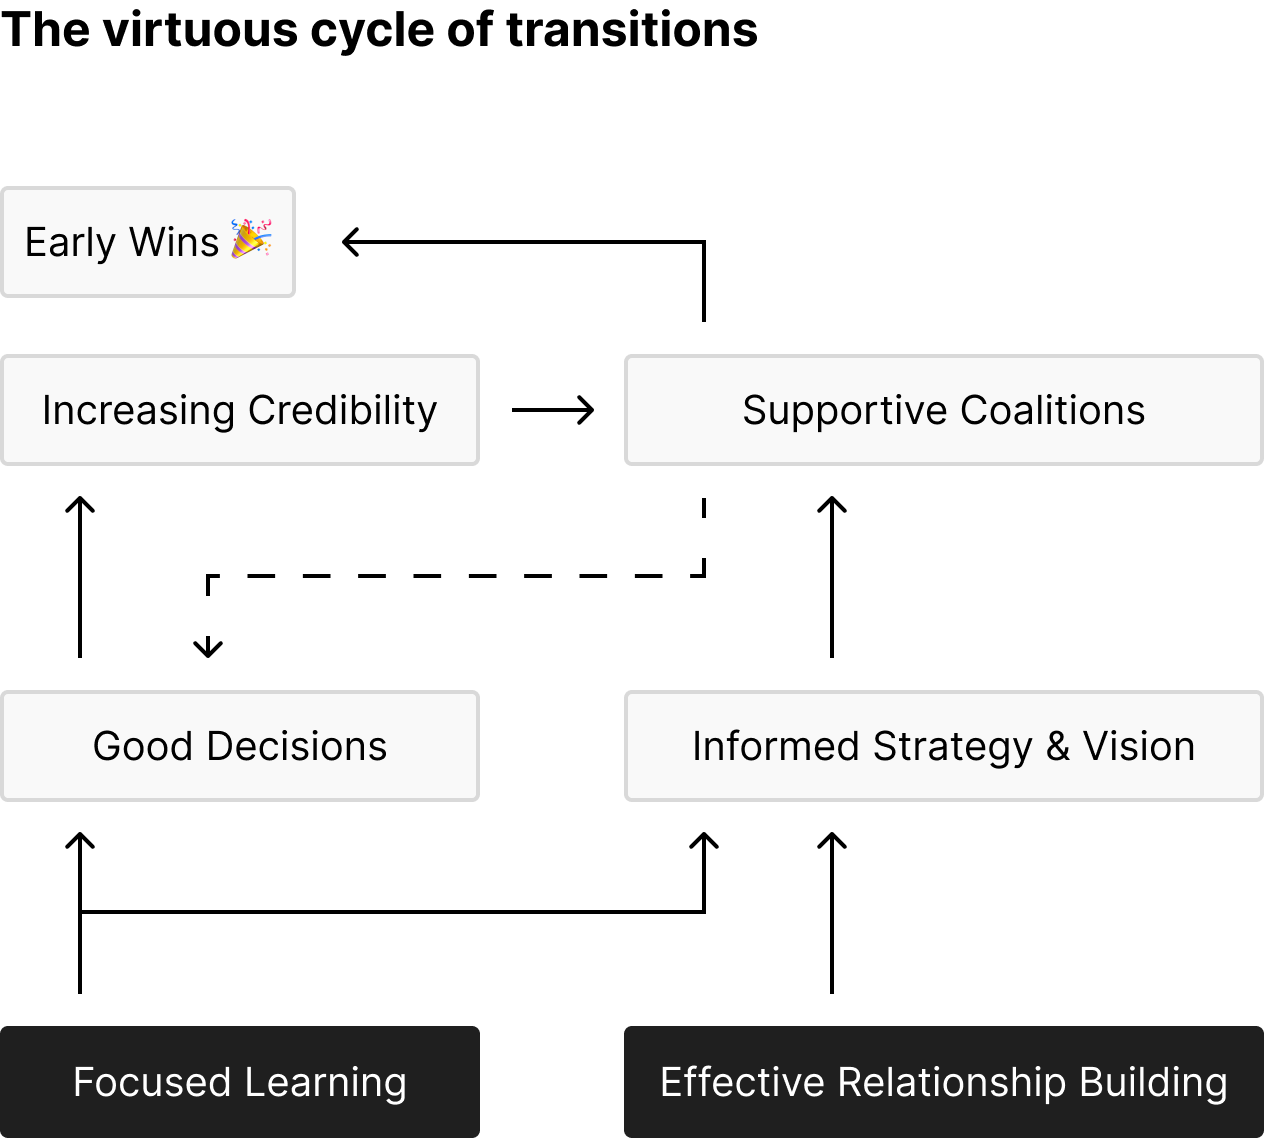 The virtuous cycle of transitions starts with focused learning and effective relationship building, which leads to good decisions and ultimately early wins